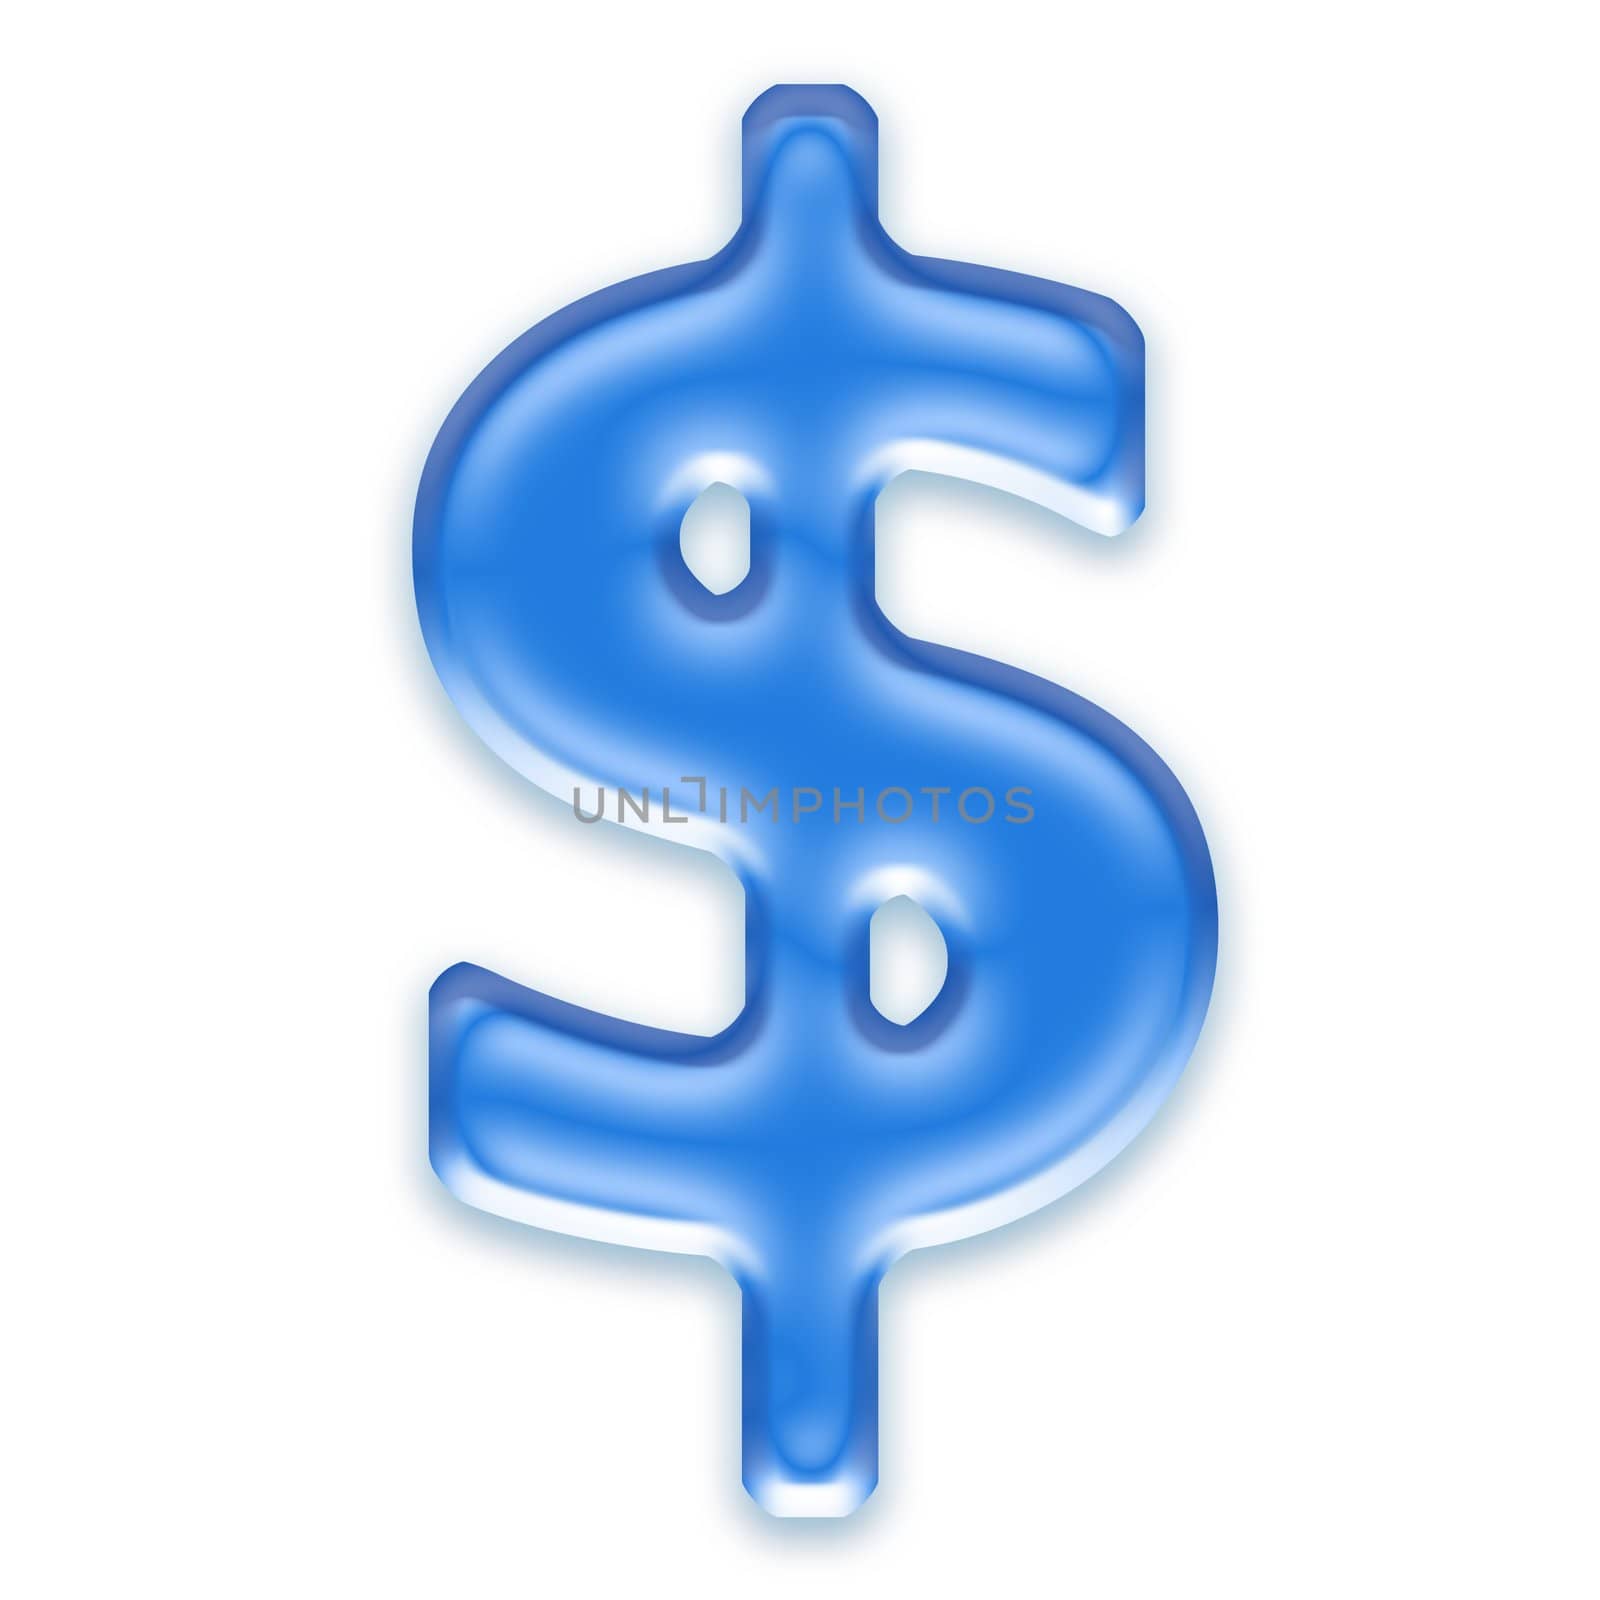 Aqua currency sign isolated on a white background - Dollar